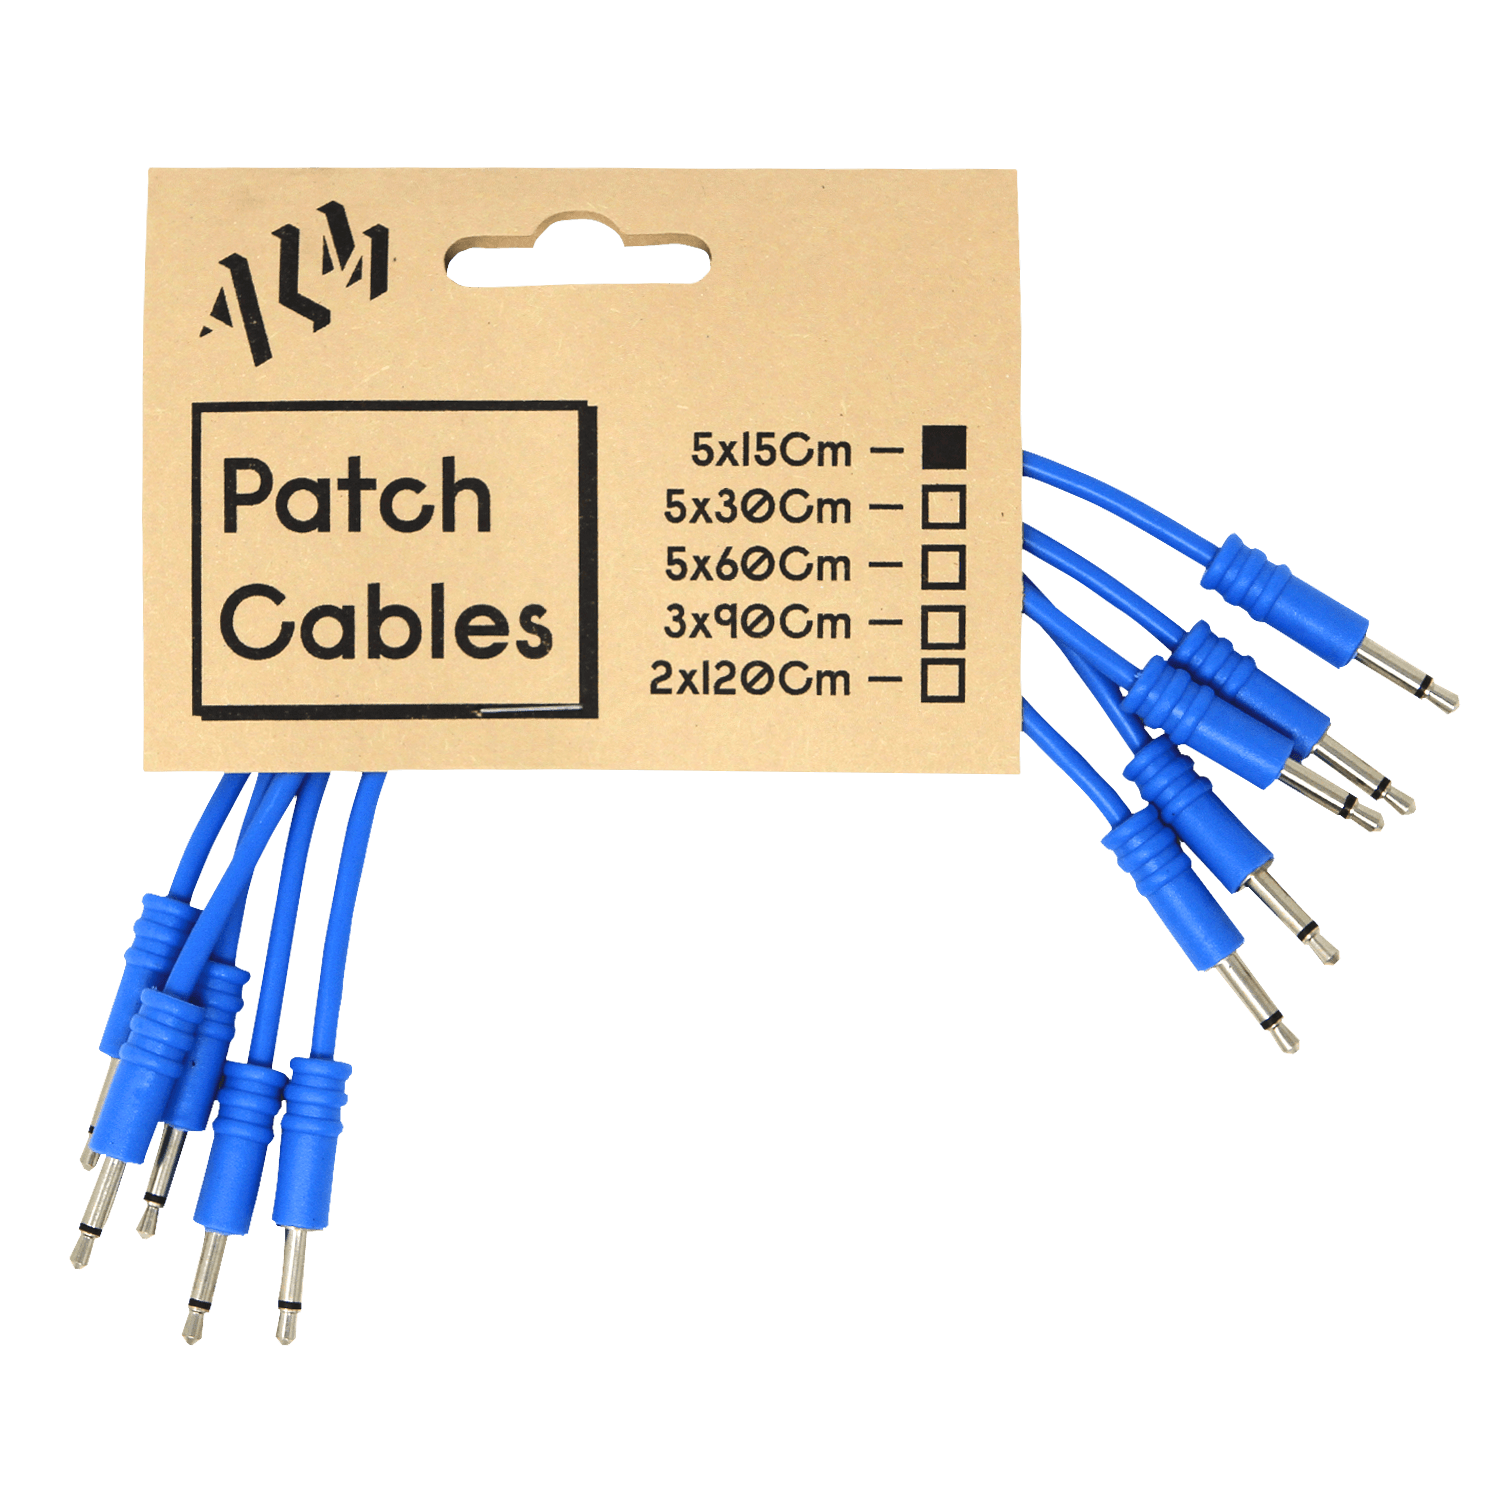 ALM Busy Circuits 5 pack of 5 x 15cm (e.g. 25 cables)